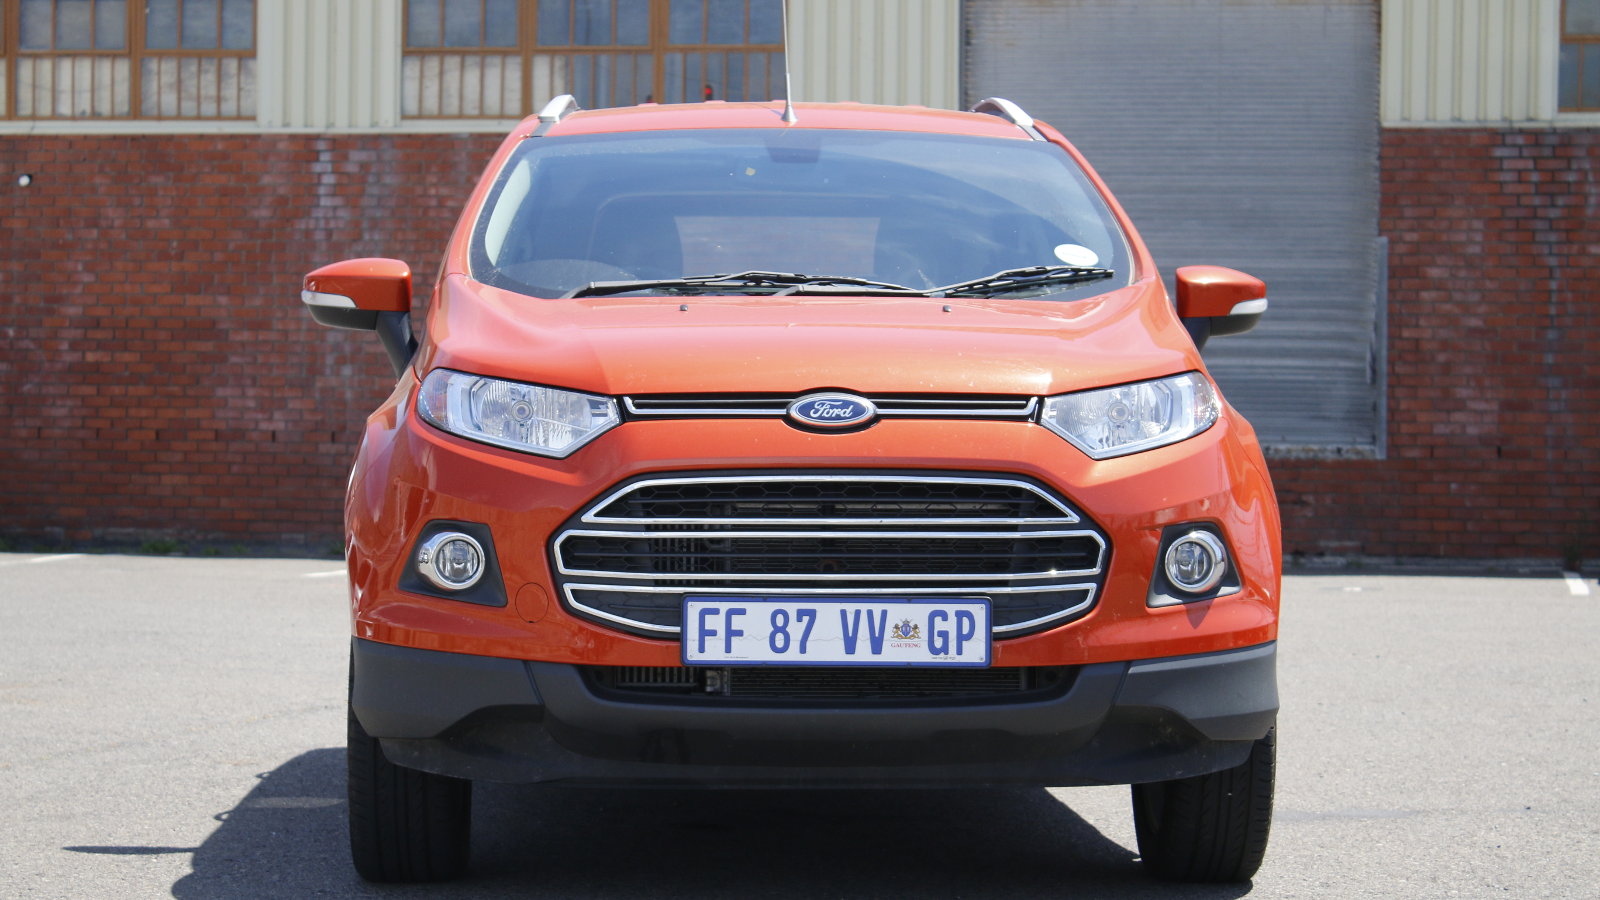 Road test: Ford Ecosport is sporty – but not so eco